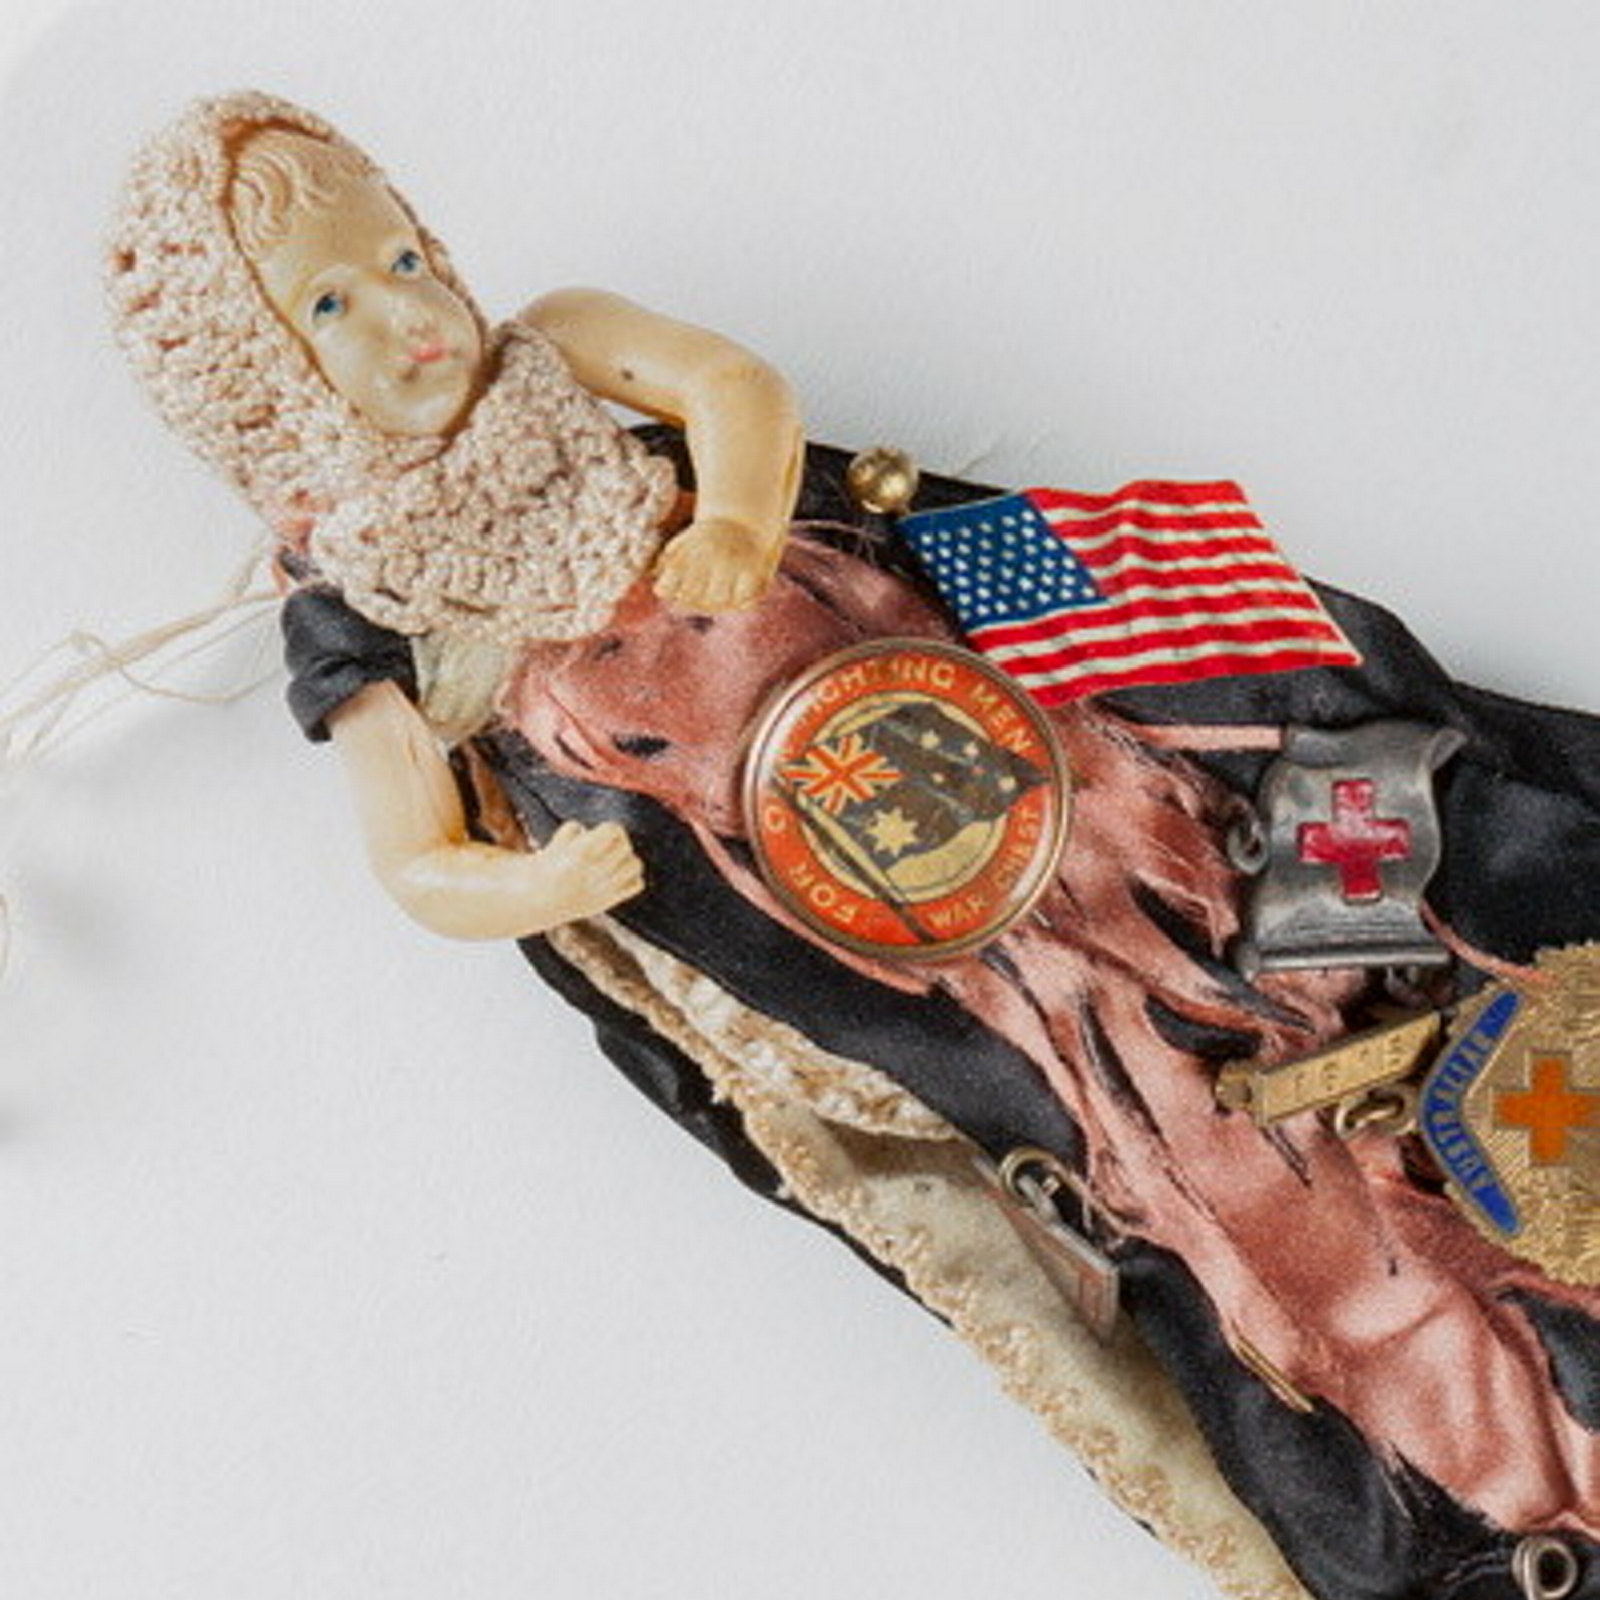 Closeup of doll dressed in badges.